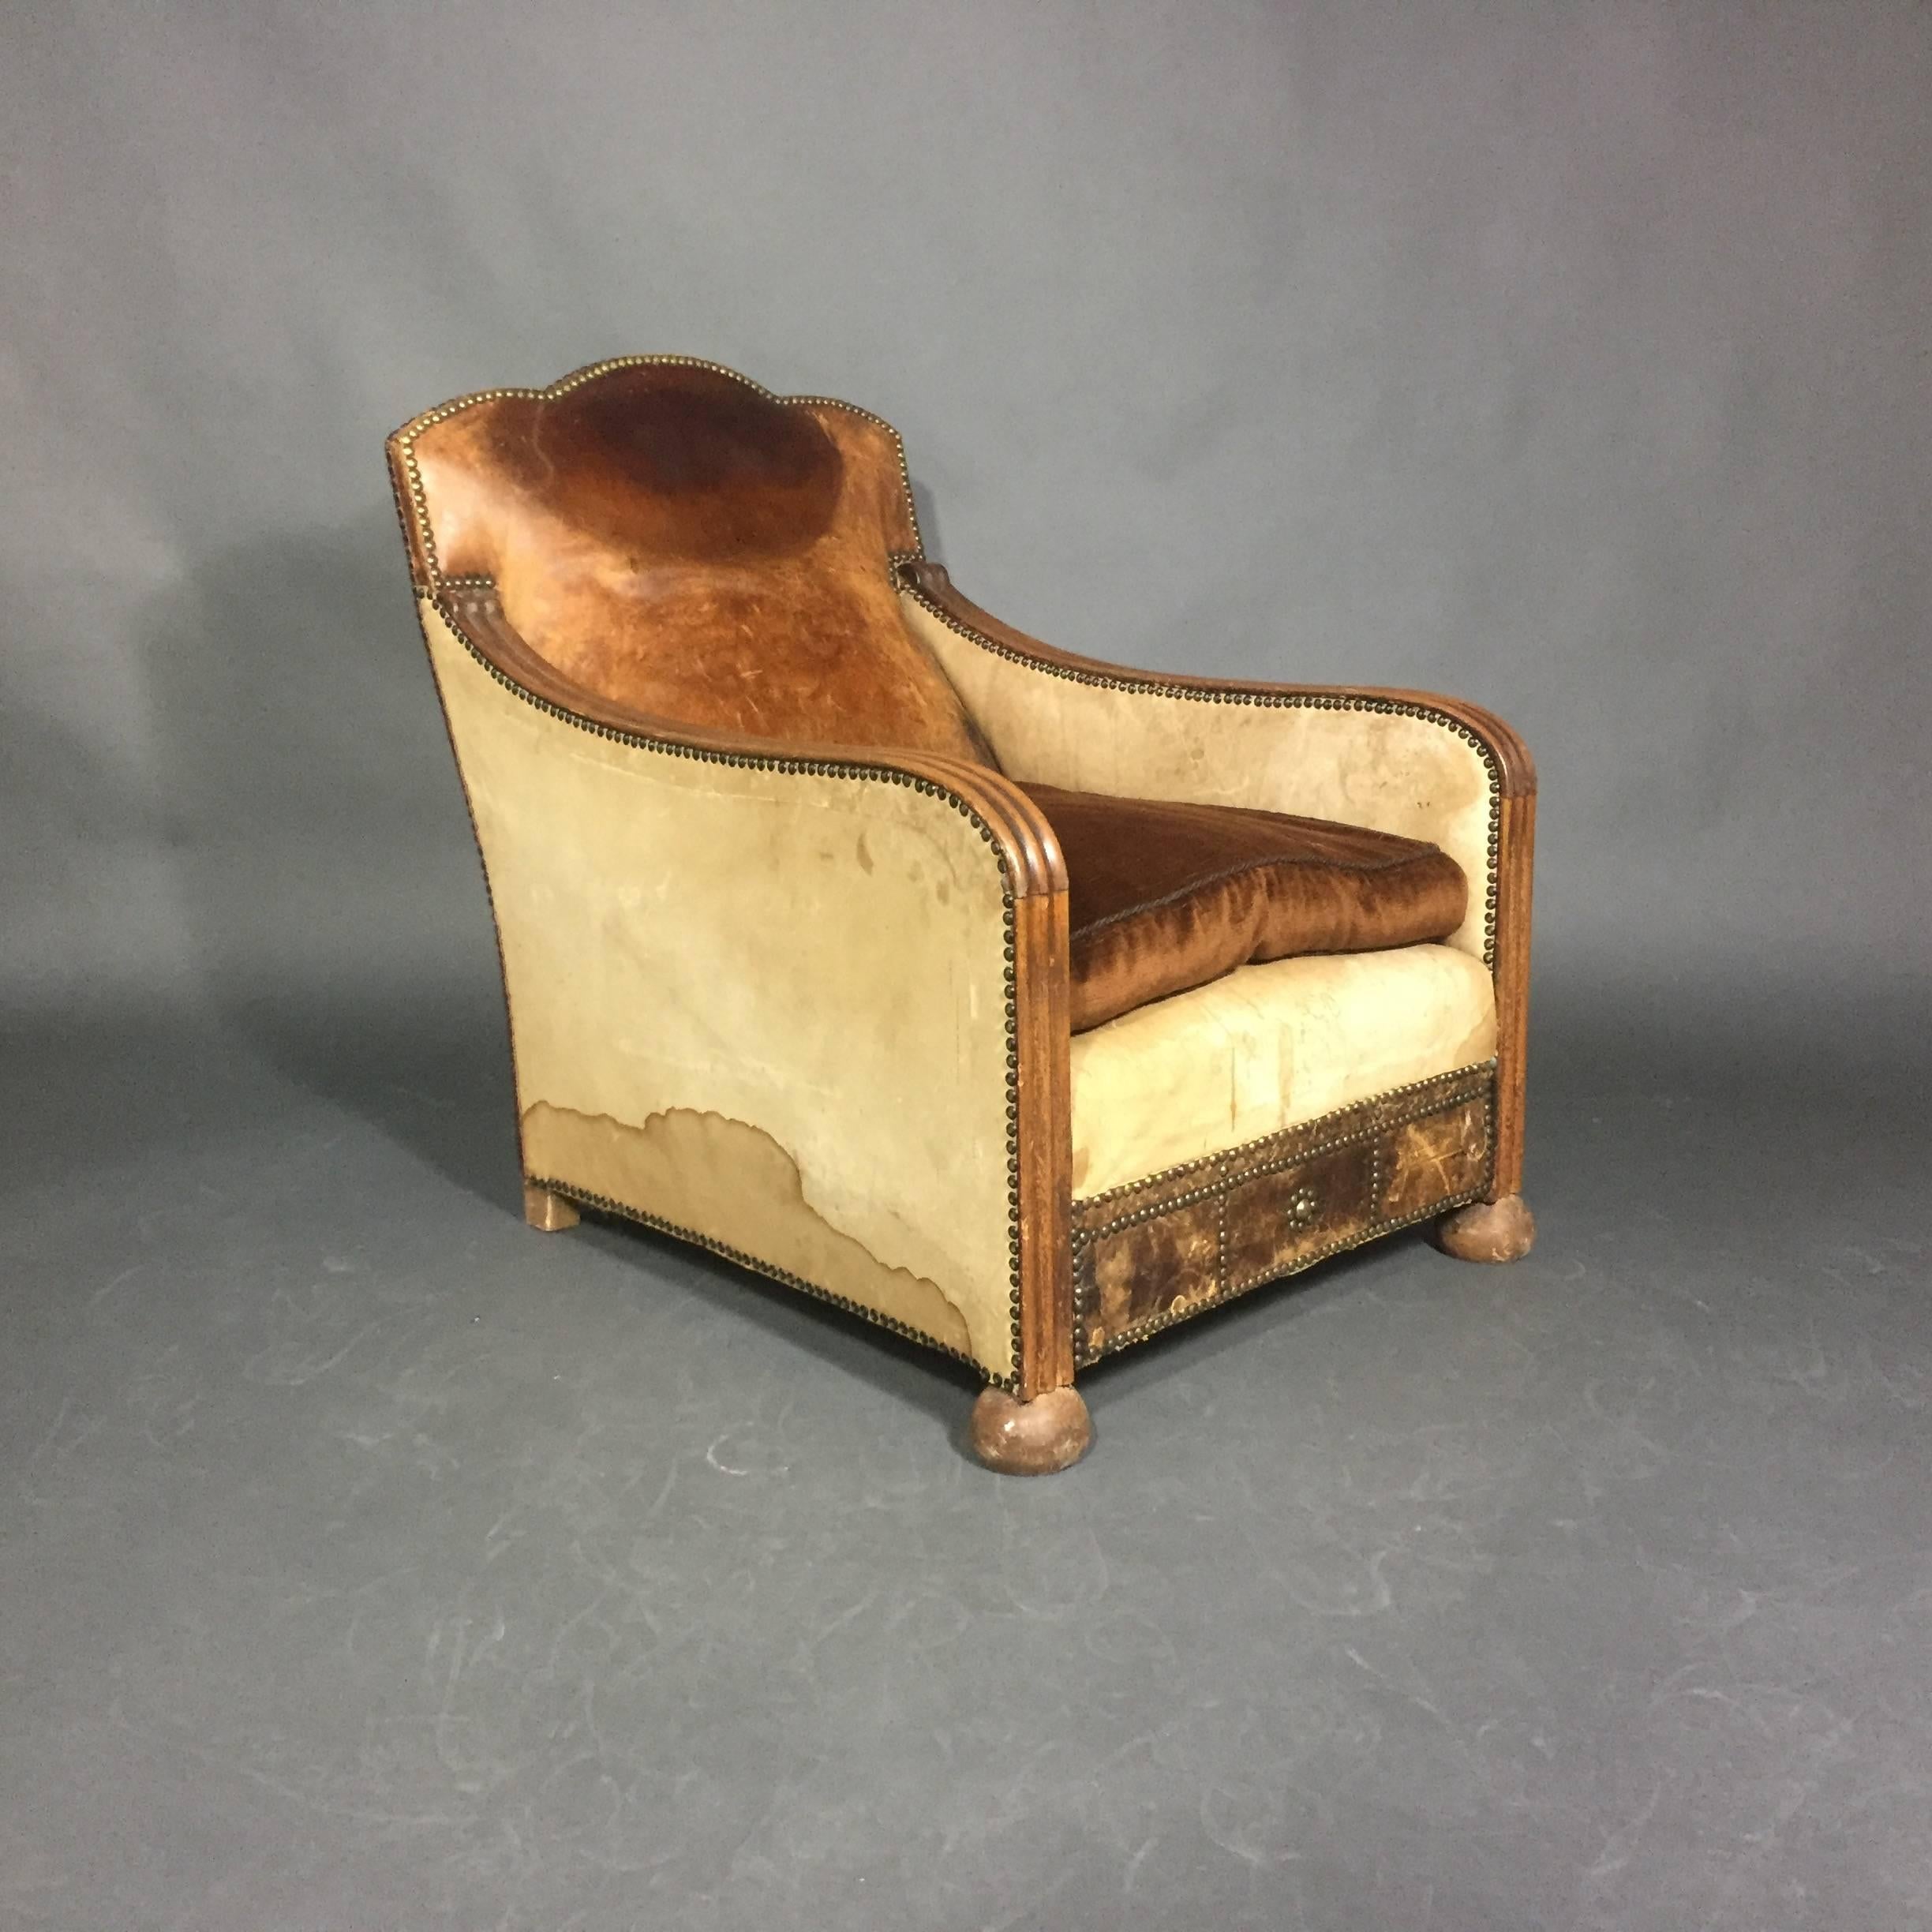 Art Deco at its clubby best. Leather armchair attributed to Otto Schultz from the 1930s with sculpted wood arms that extend to the base at front and crowned seat back. The chair is trimmed in brass tacks with a classic Schultz design to the front.